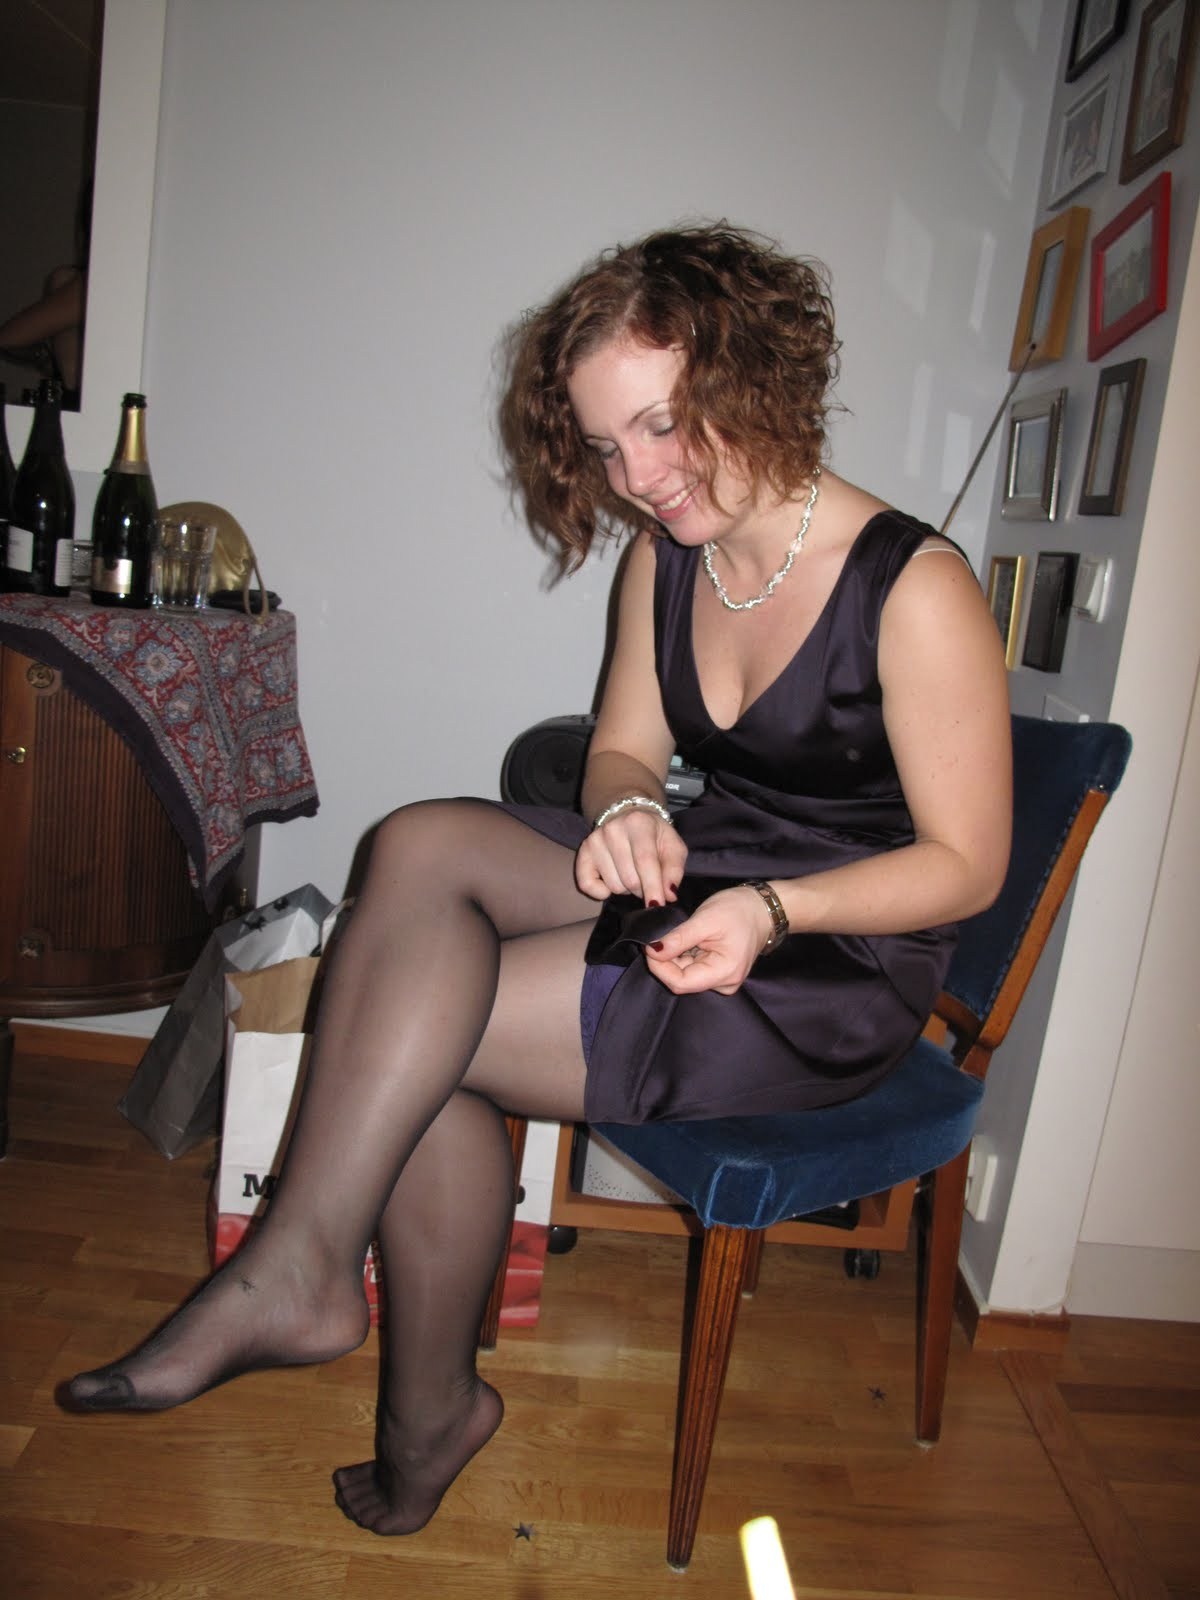 Erotica from Women Over 40 in Pantyhose (63 photos) image